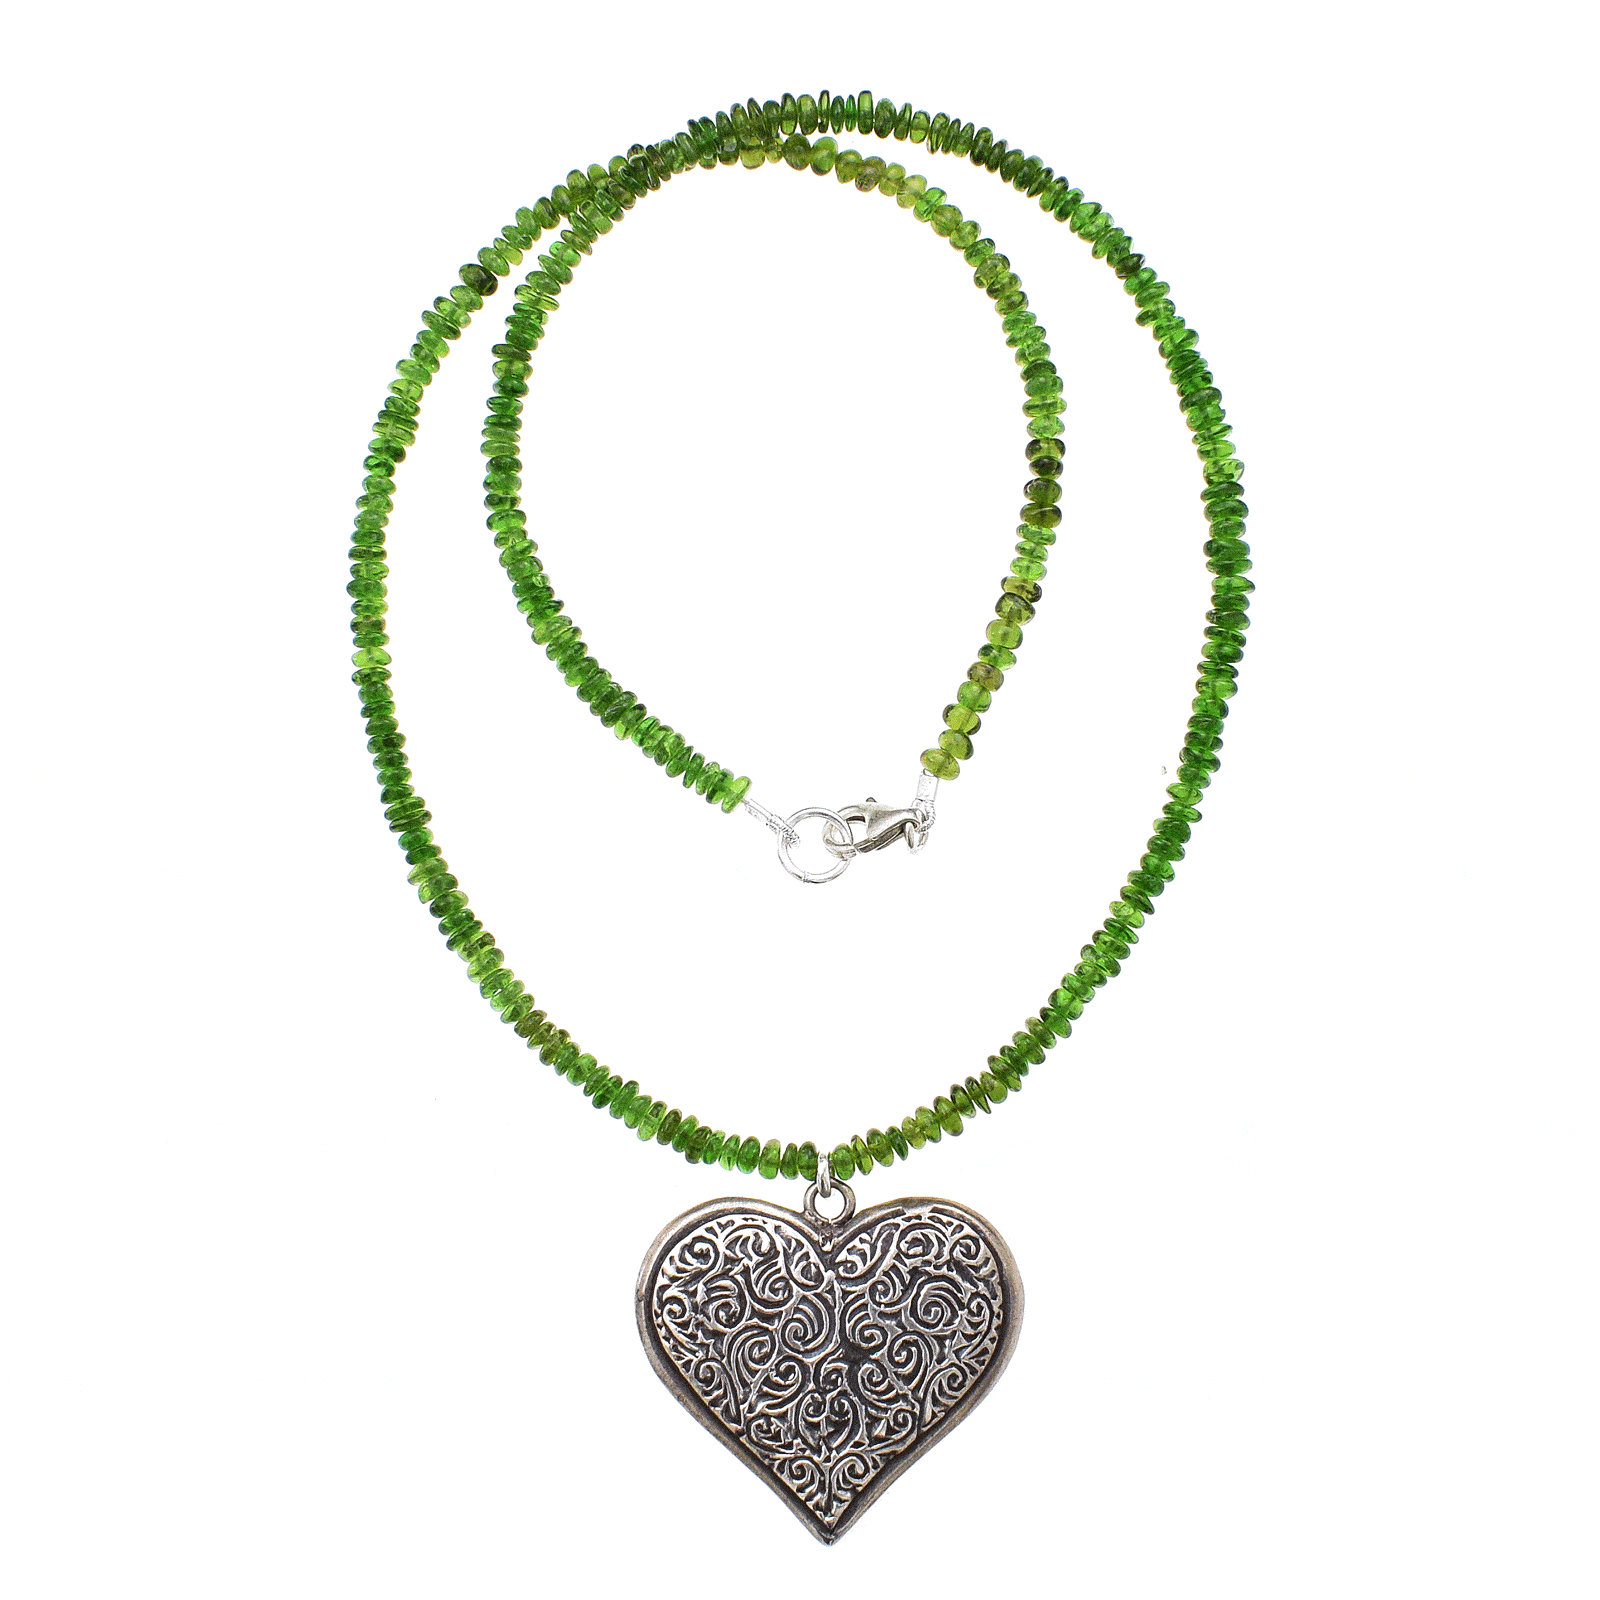 Handmade necklace with natural Diopside gemstones and sterling silver pendant in a heart shape with embossed designs. Buy online shop.